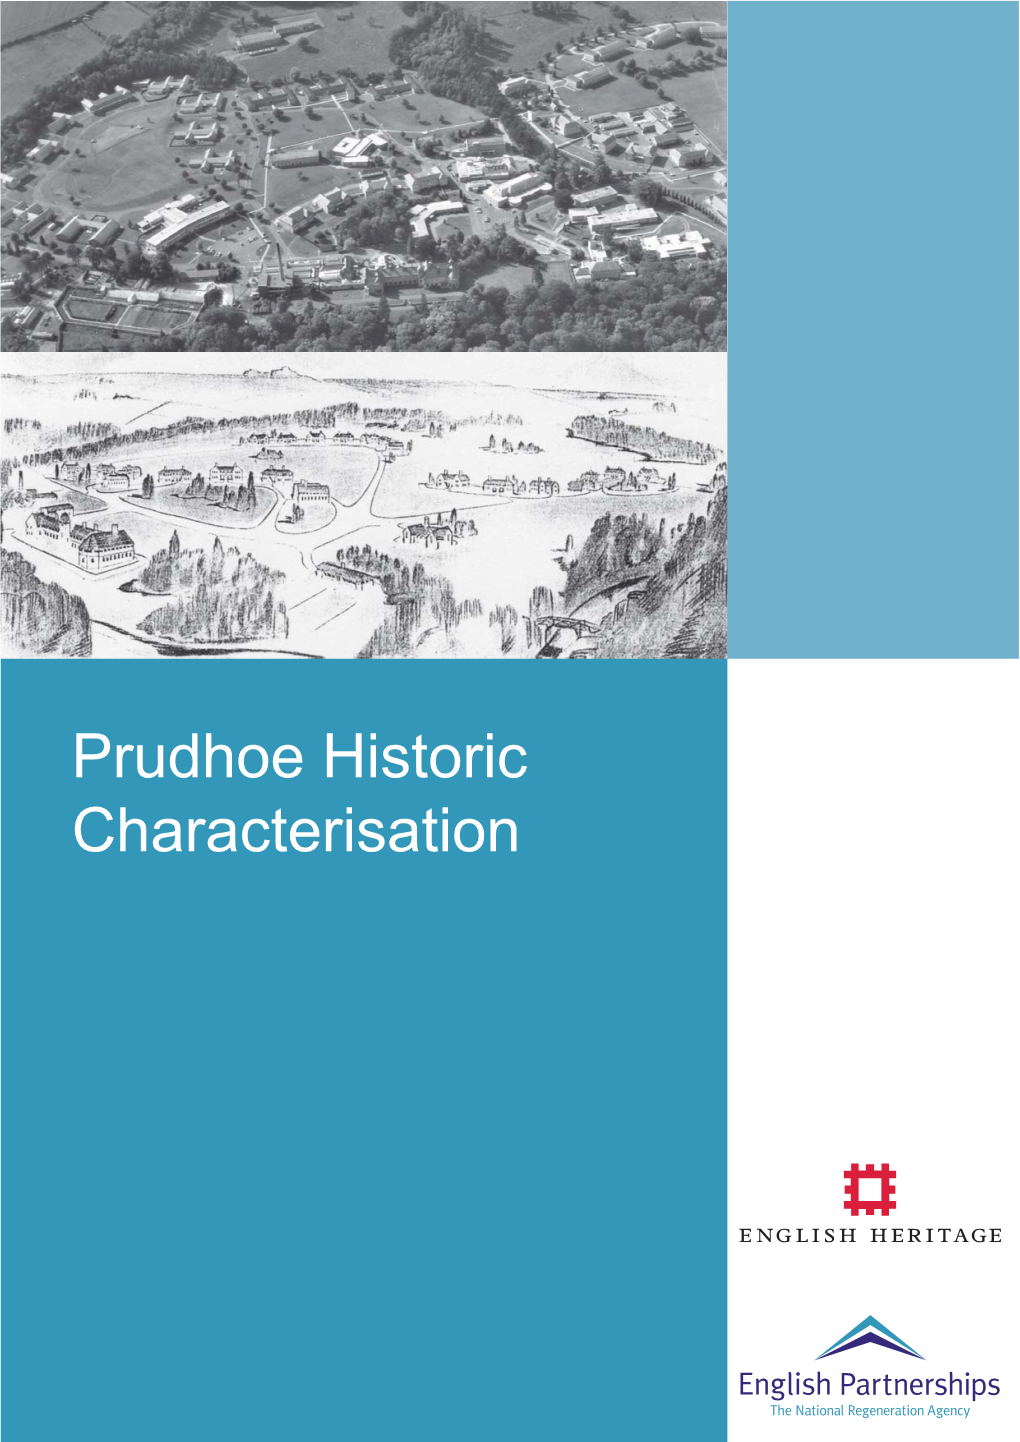 Prudhoe Historic Characterisation